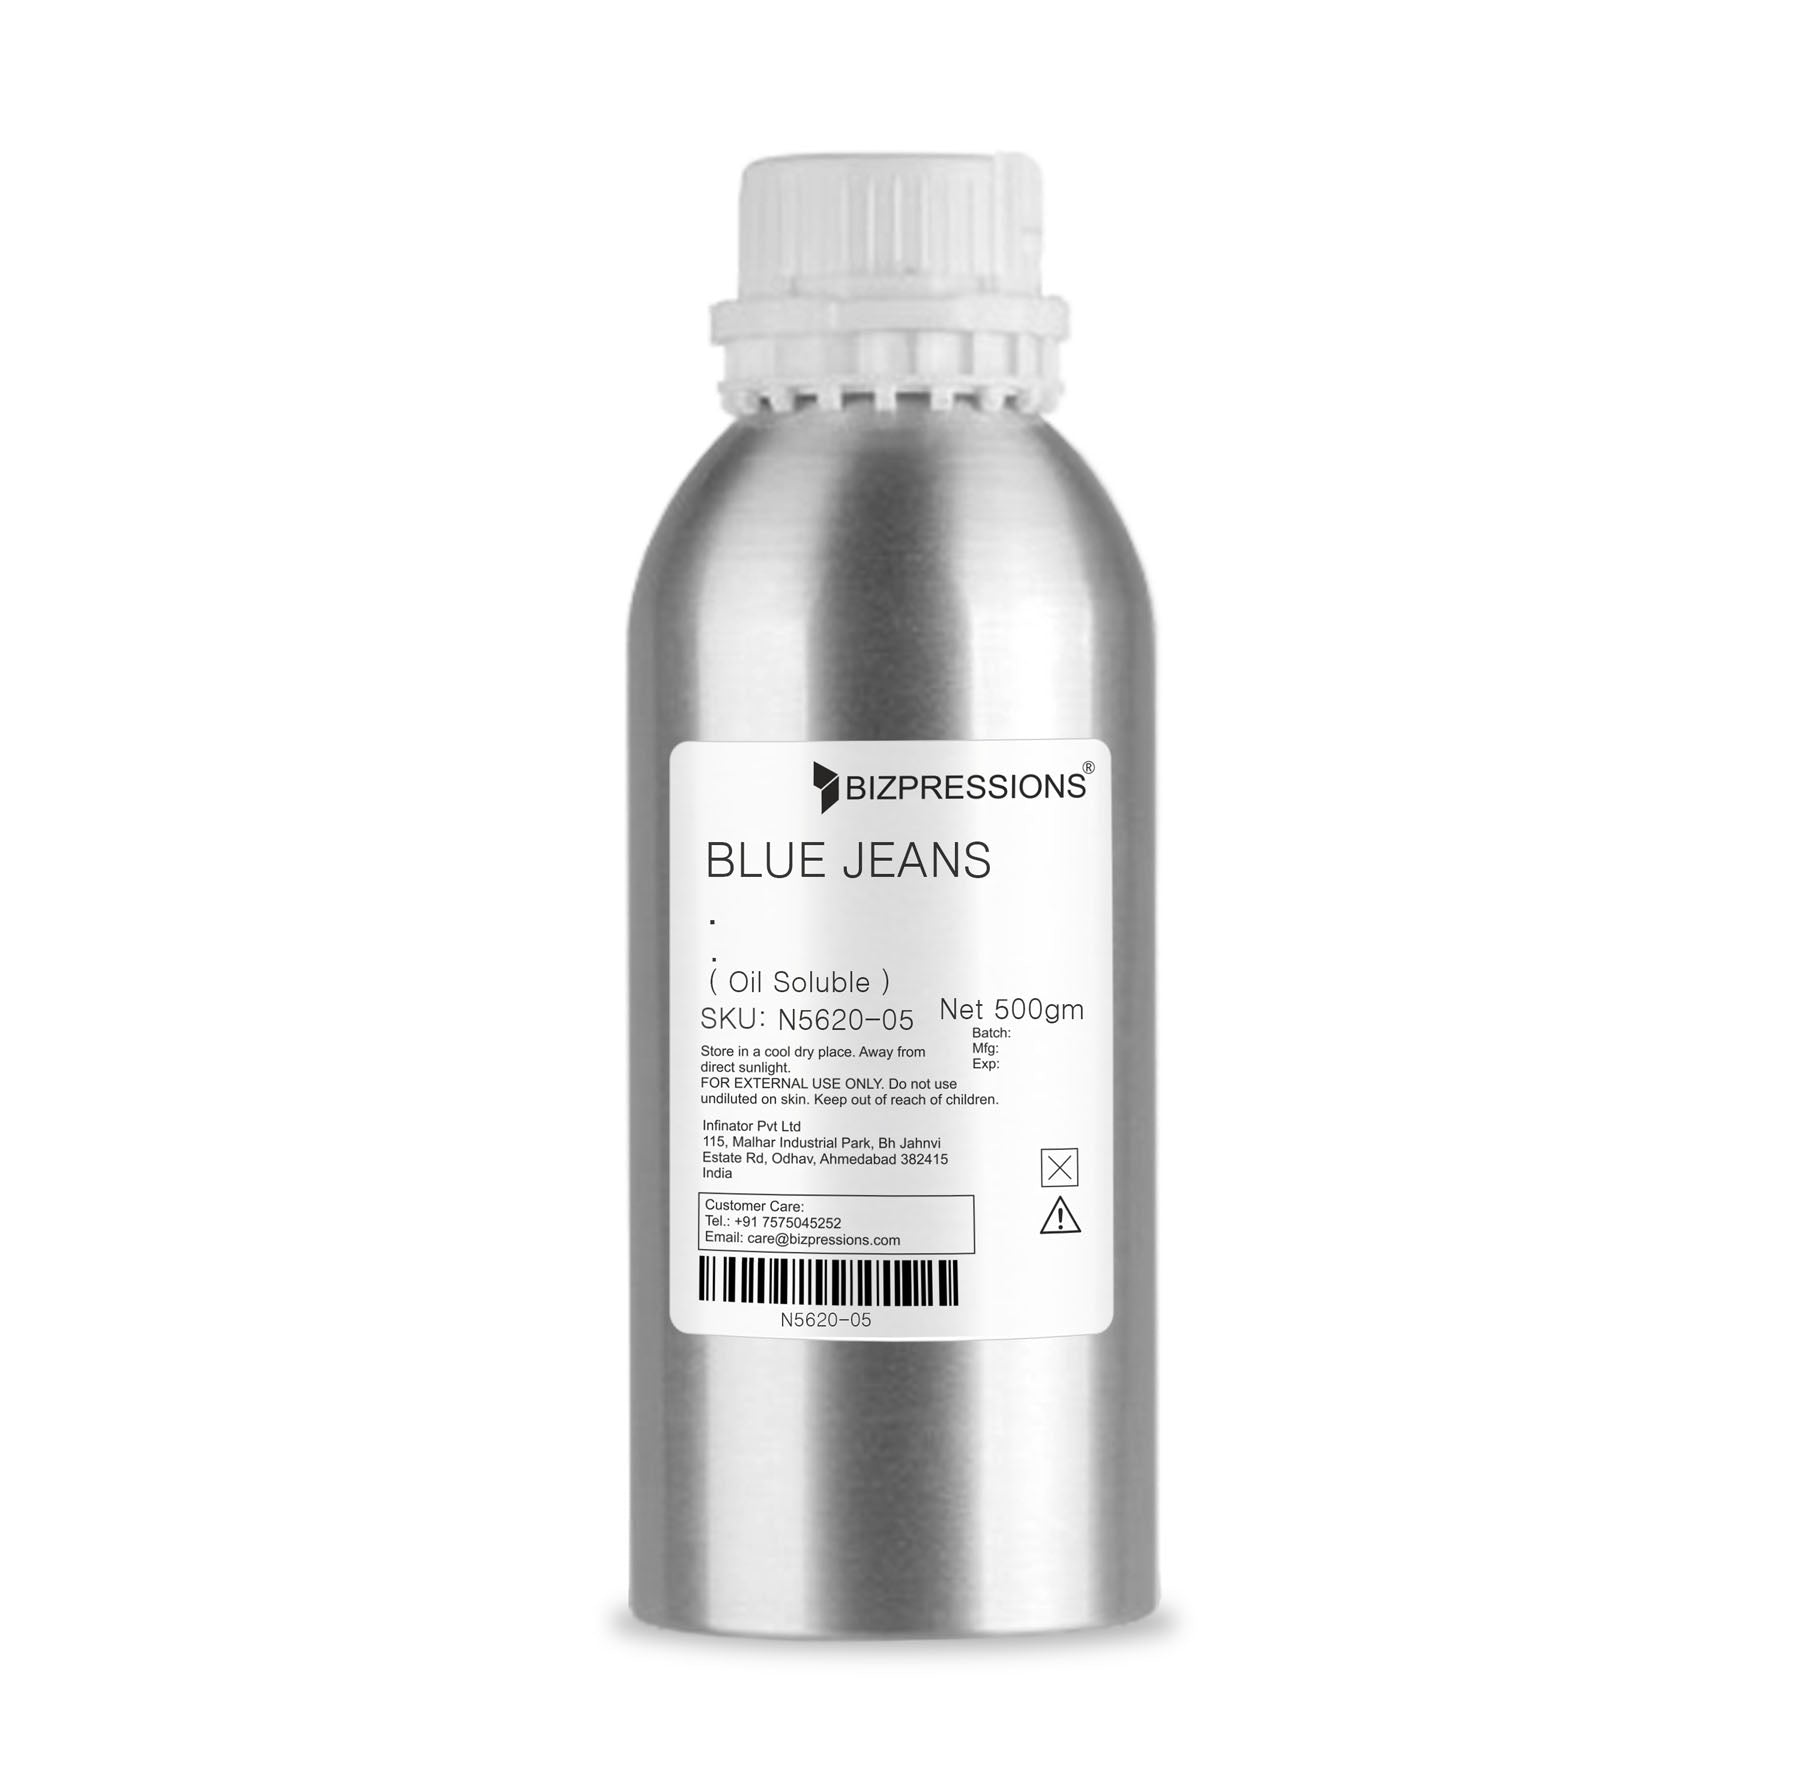 BLUE JEANS - Fragrance ( Oil Soluble ) - 500 gm